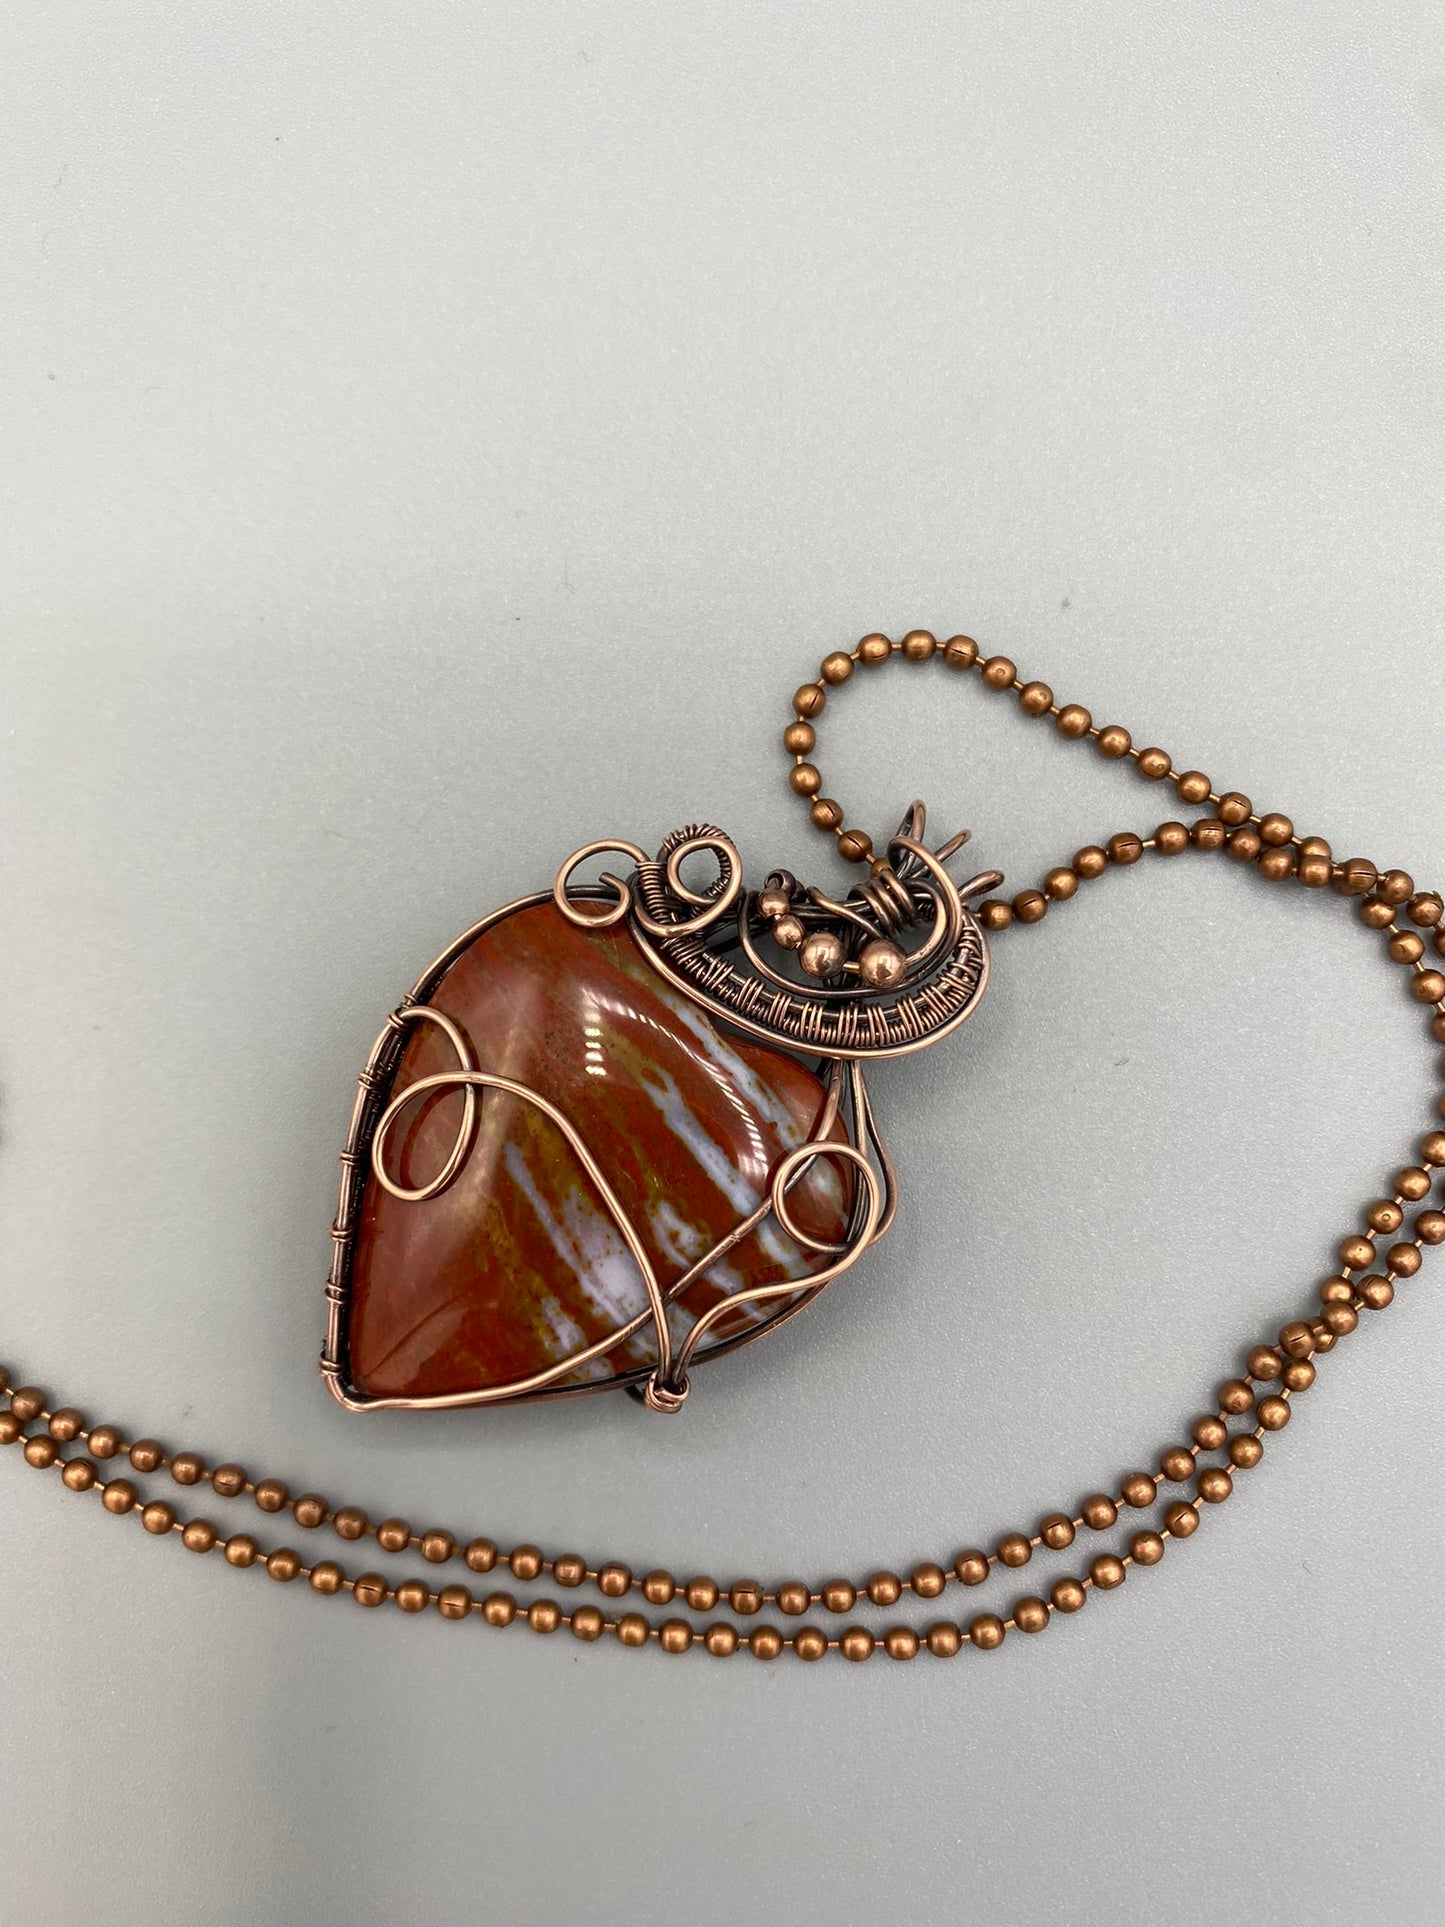 Heart Stone Wire Wrapped Pendant | Copper Wire Wrapped Pendant